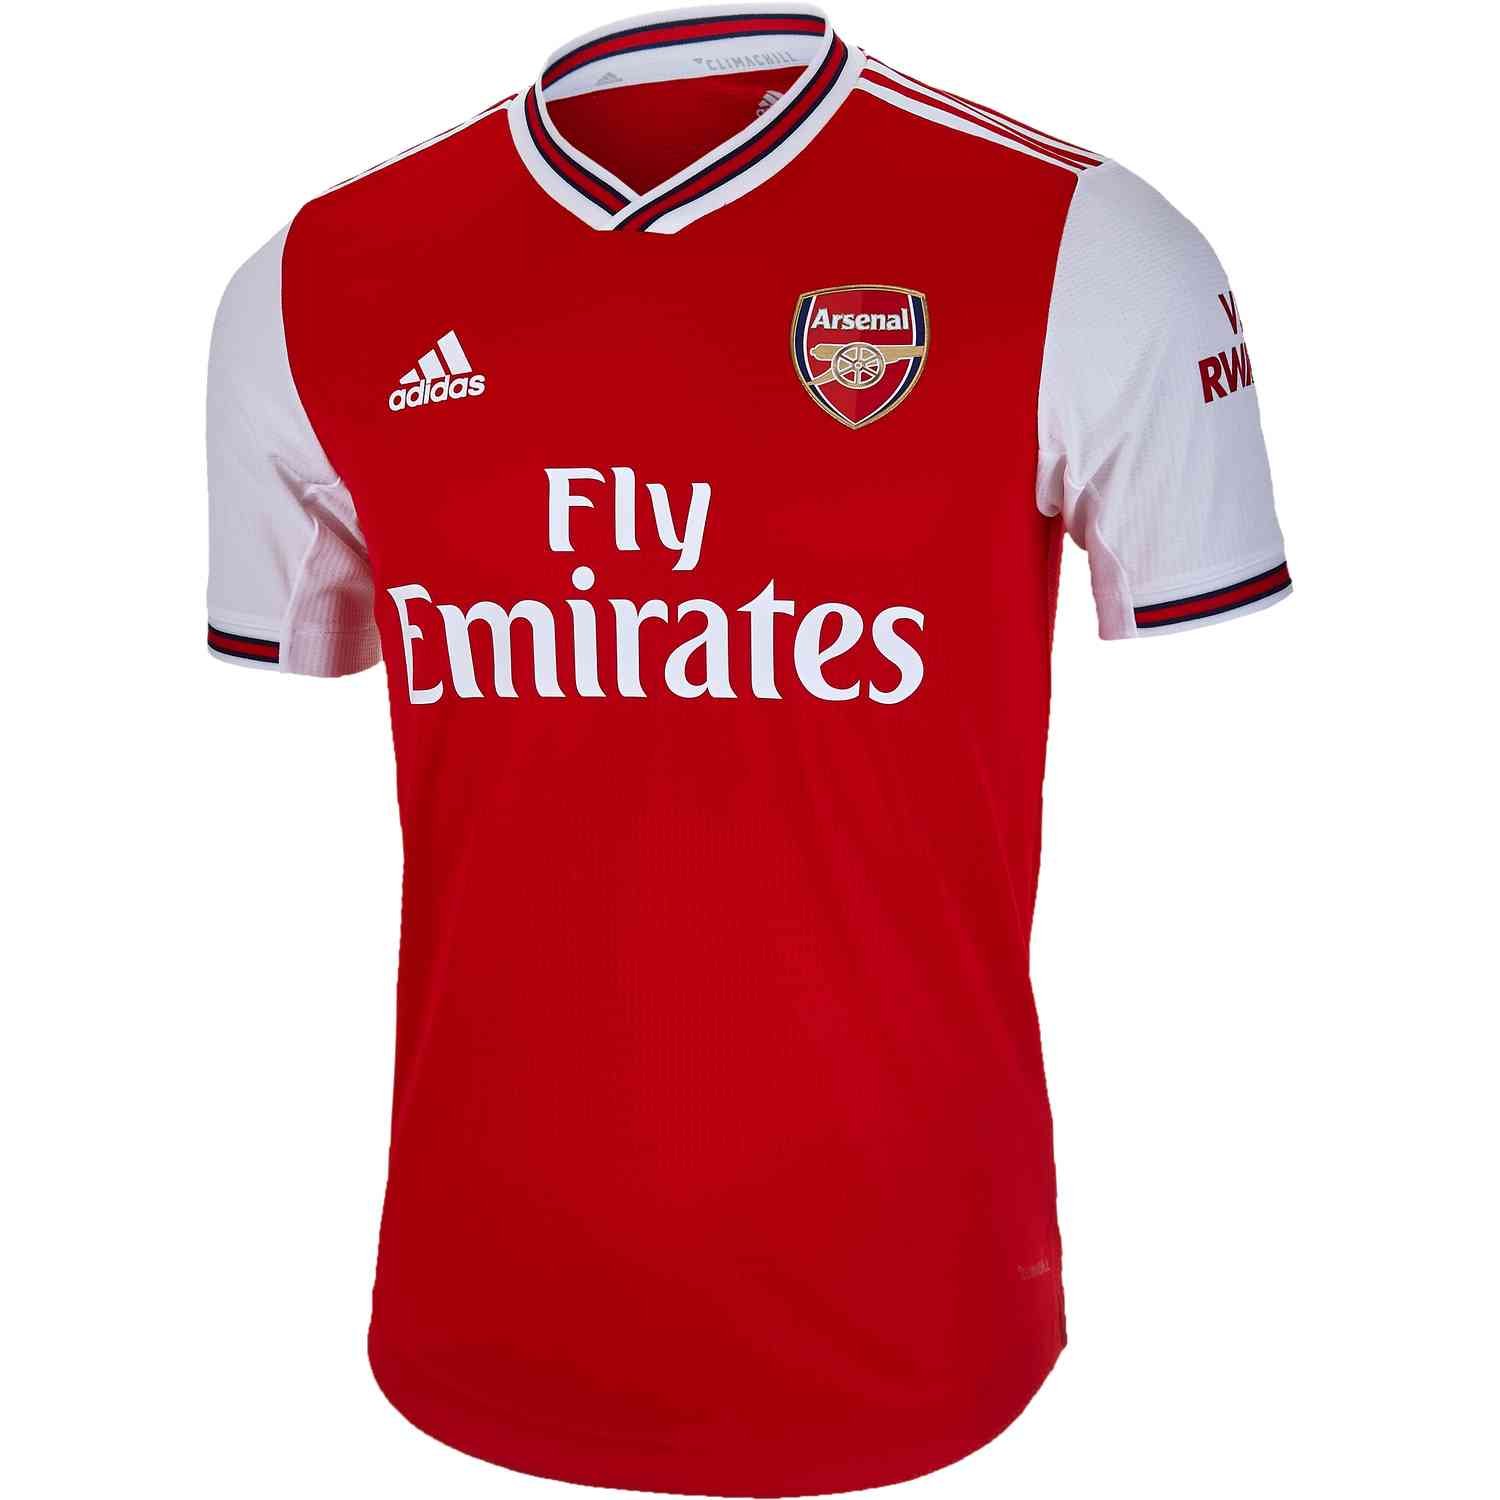 arsenal authentic home jersey